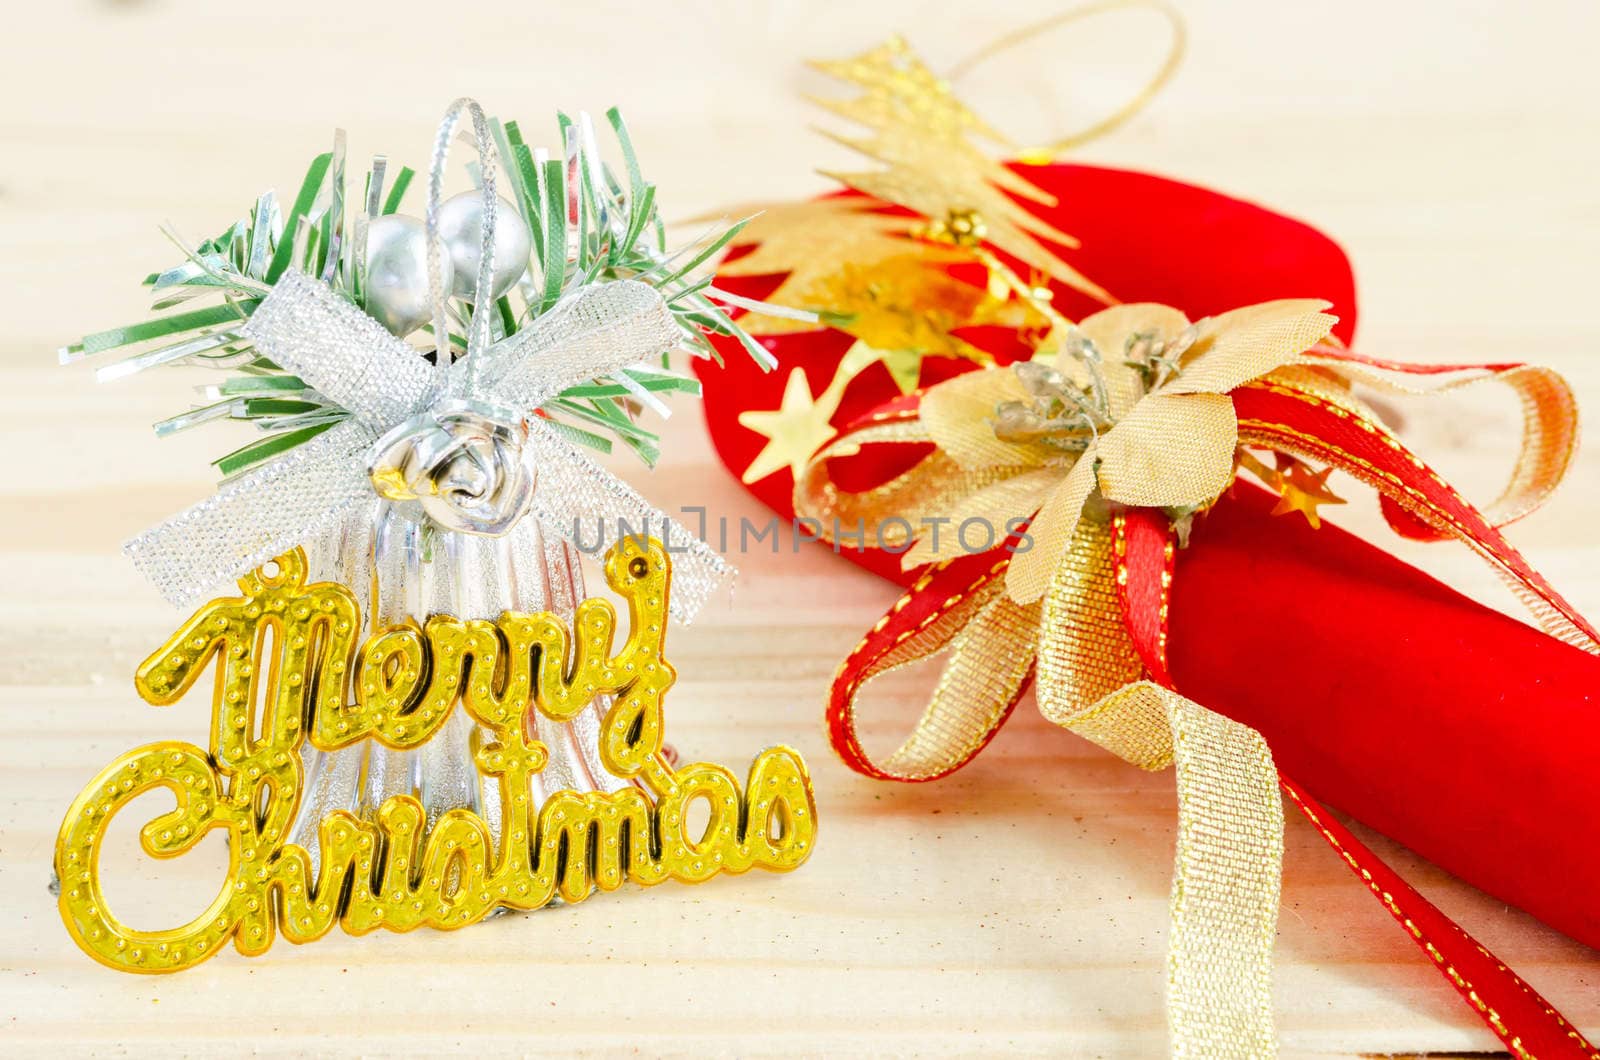 Merry Christmas on wooden background. by Gamjai